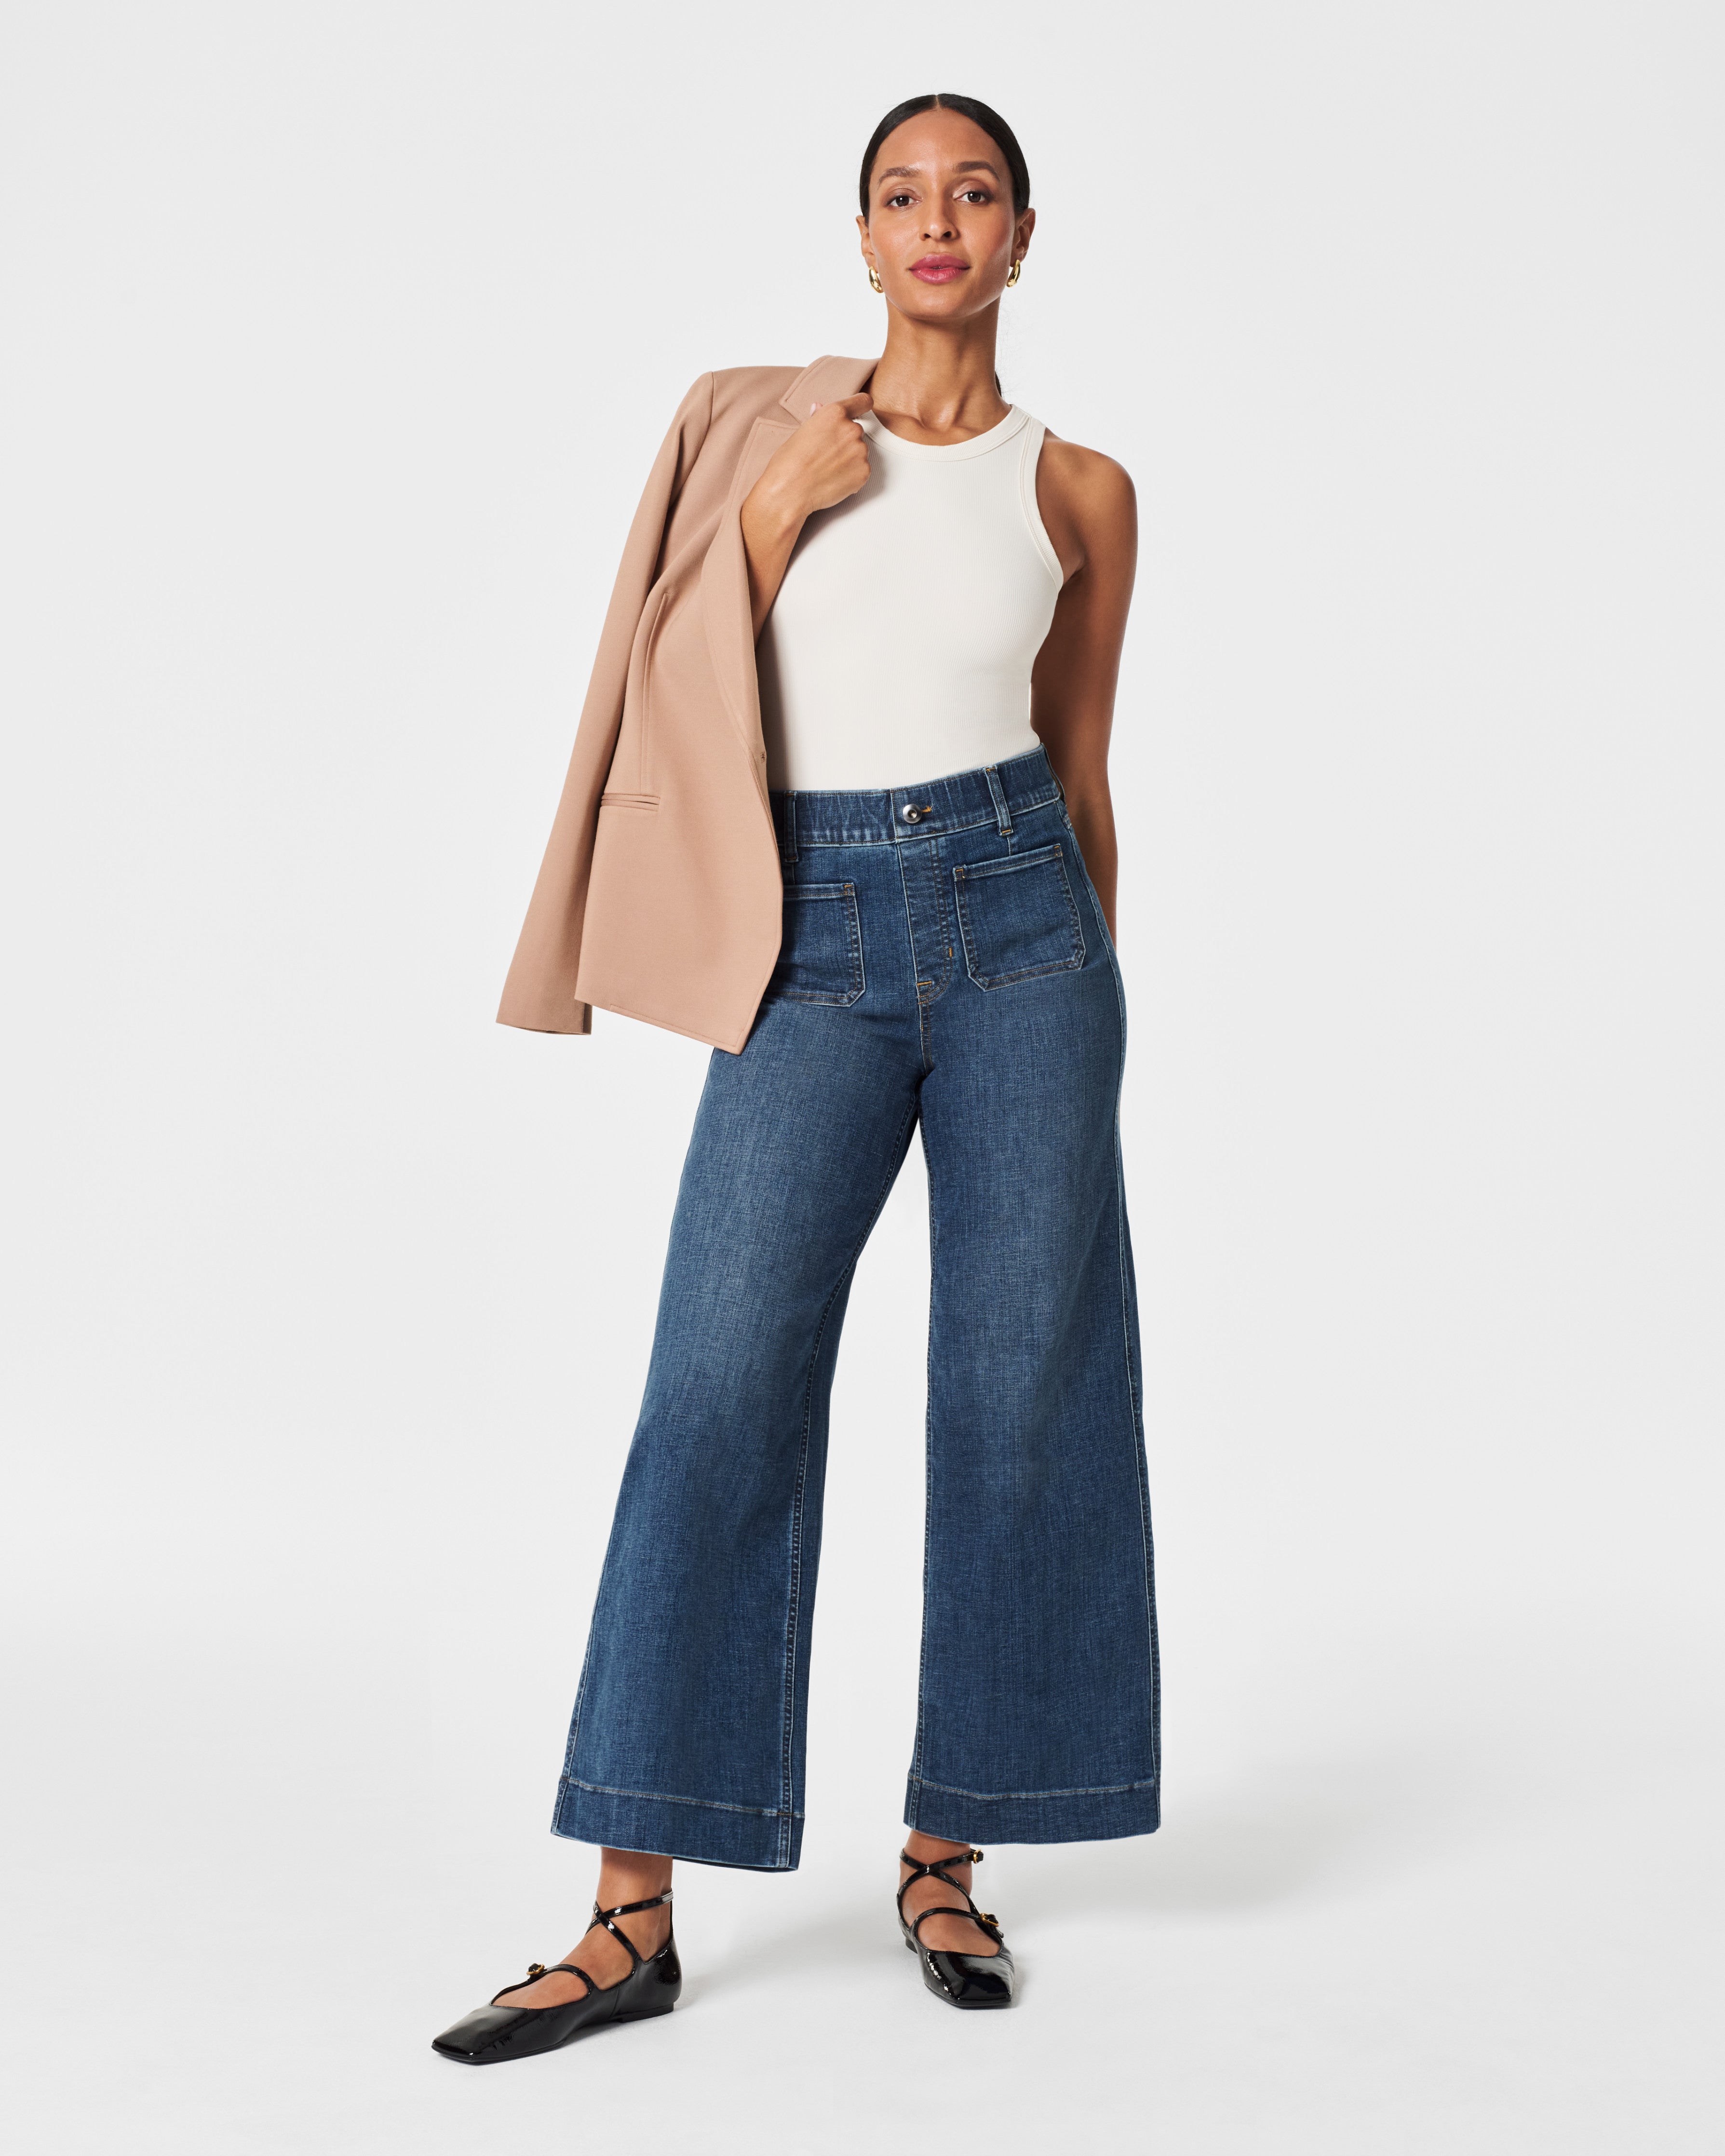 SPANX Cropped Flare Denim, White - Jeans - Bottoms - The Blue Door